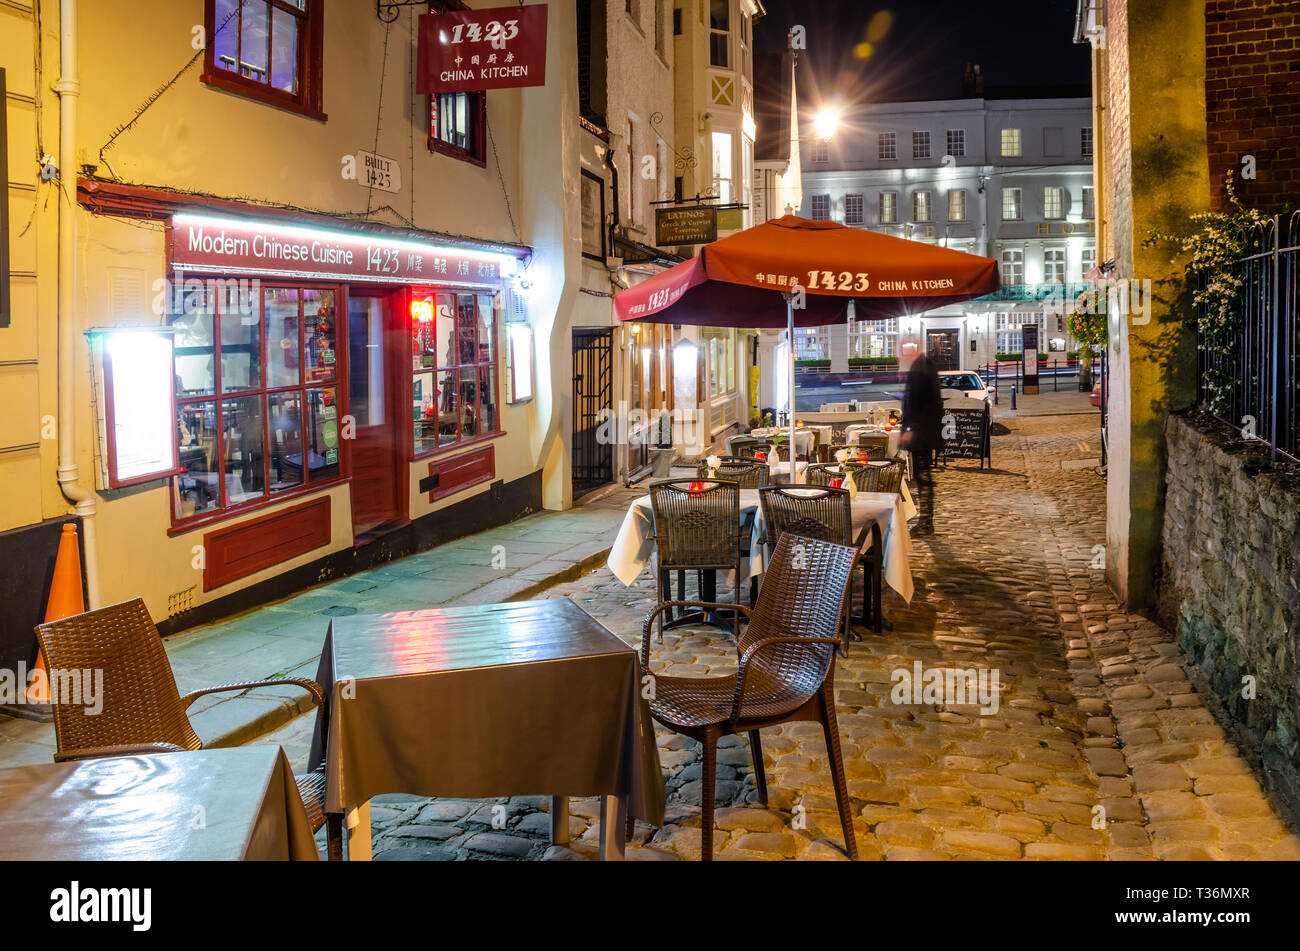 Table and chairs setup for outside dining in front of restaurants in Church Lane, Windsor, UK at night. Stock Photo